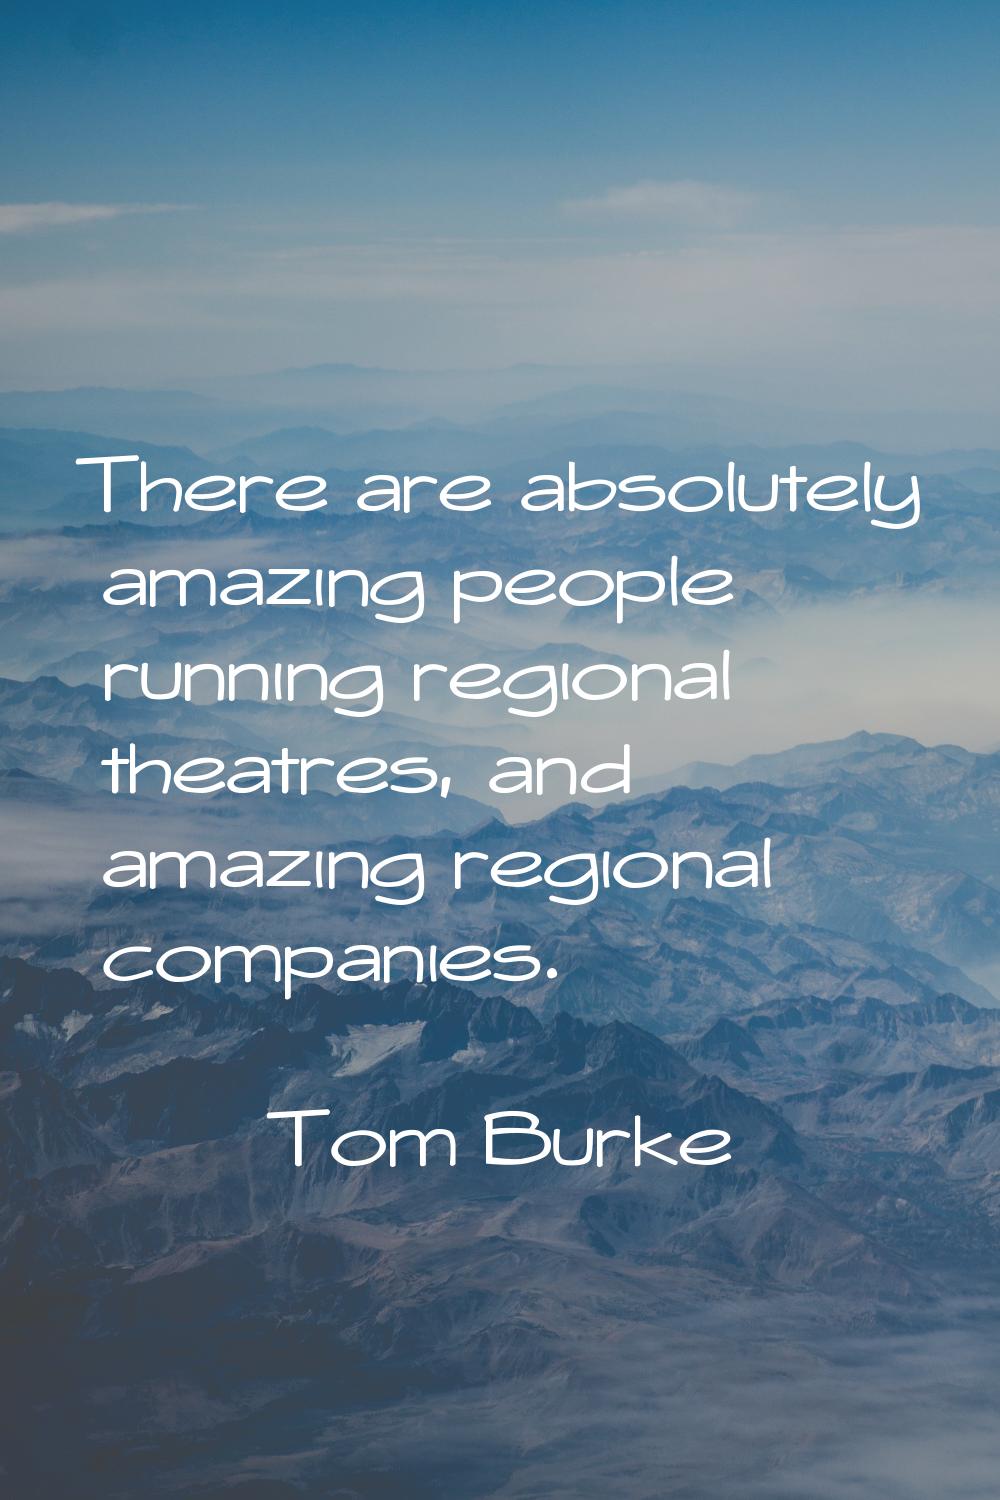 There are absolutely amazing people running regional theatres, and amazing regional companies.